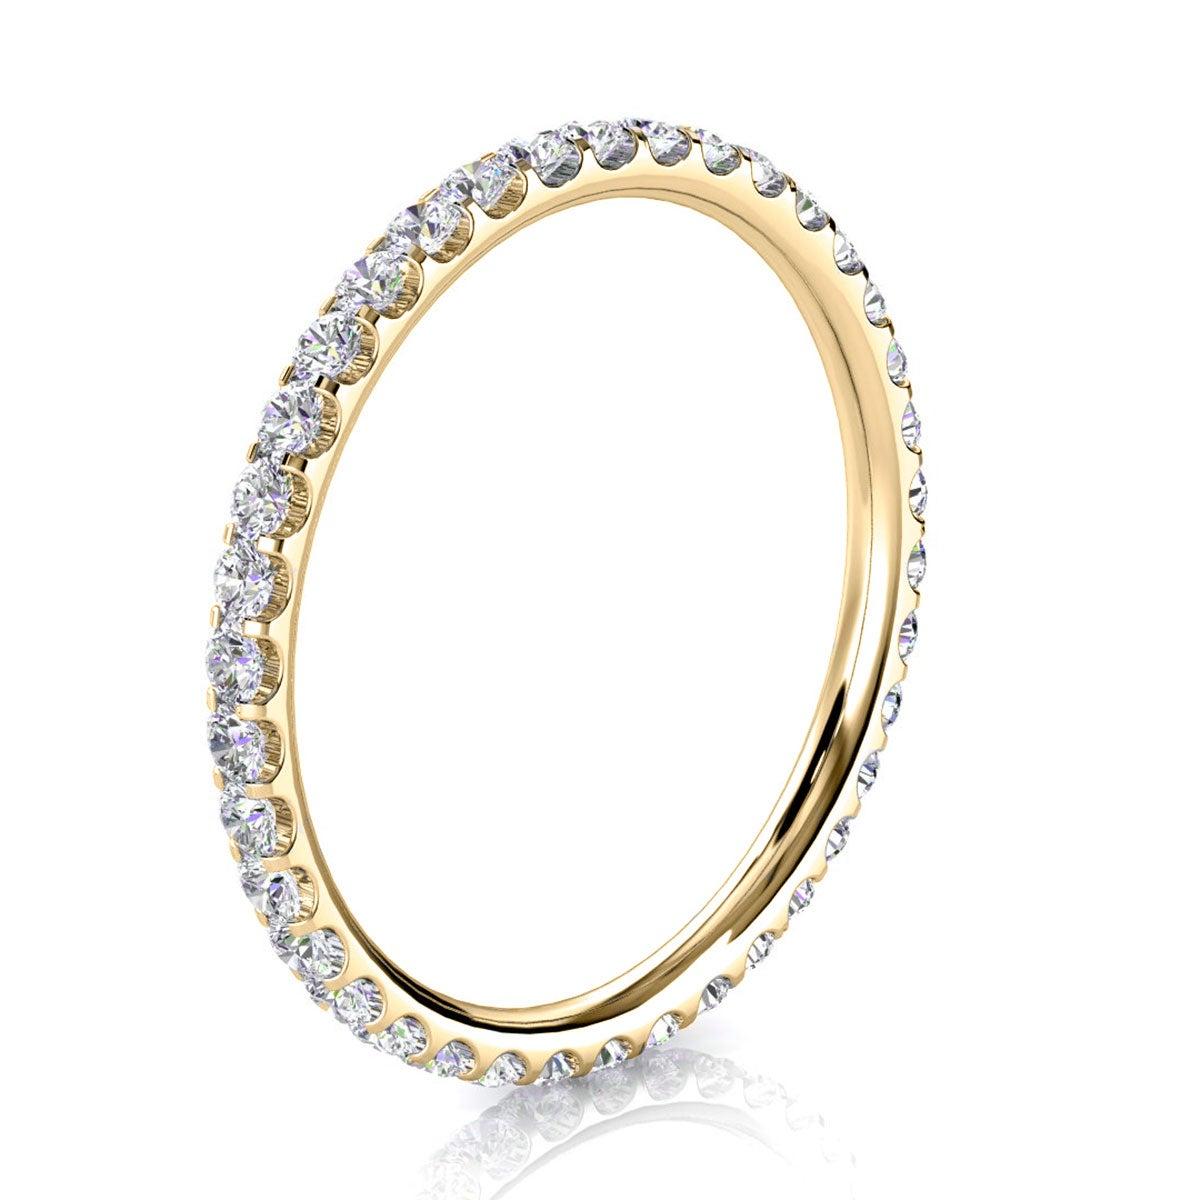 For Sale:  14K Yellow Gold Viola Eternity Micro-Prong Diamond Ring '1/2 Ct. Tw' 2